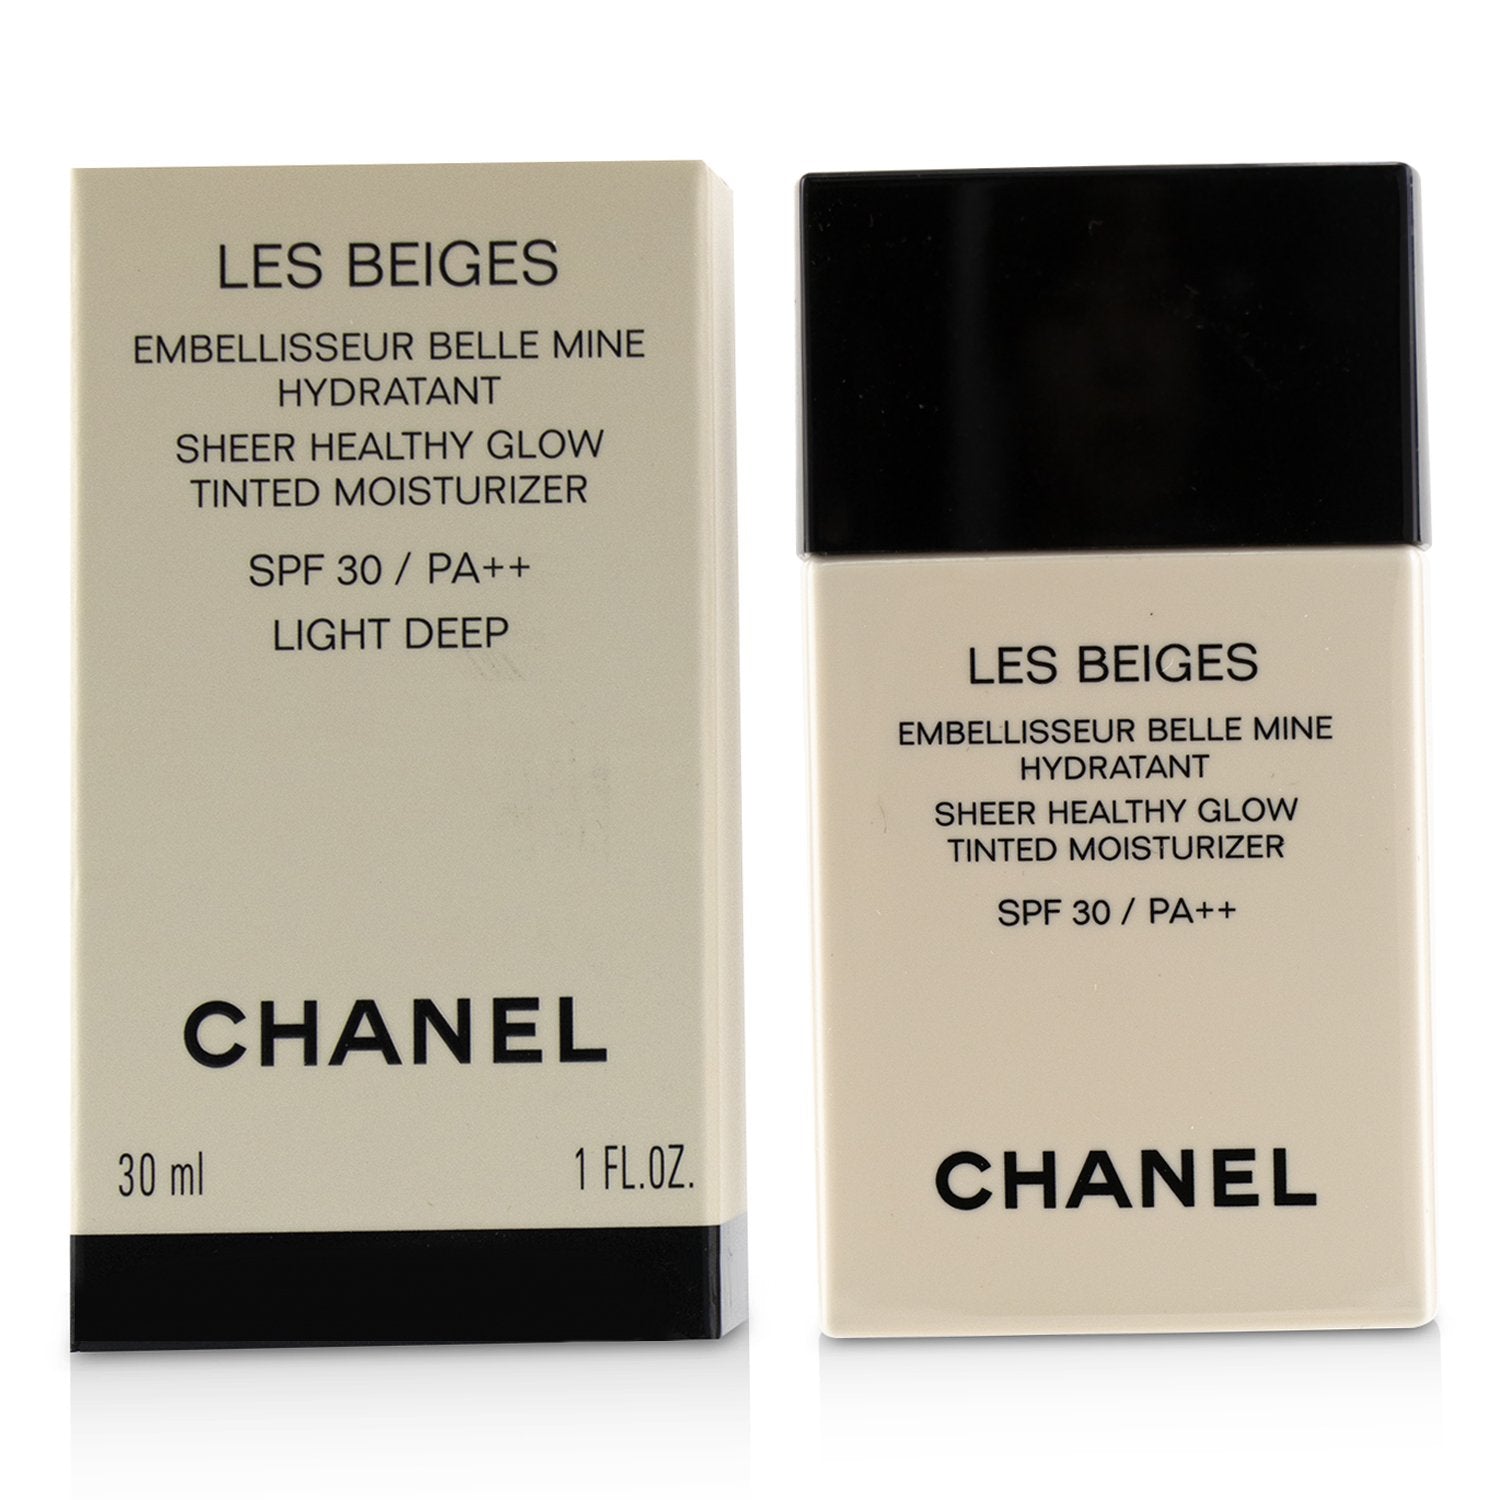 Chanel Les Beiges + Hydra Beauty = a match made in summer heaven